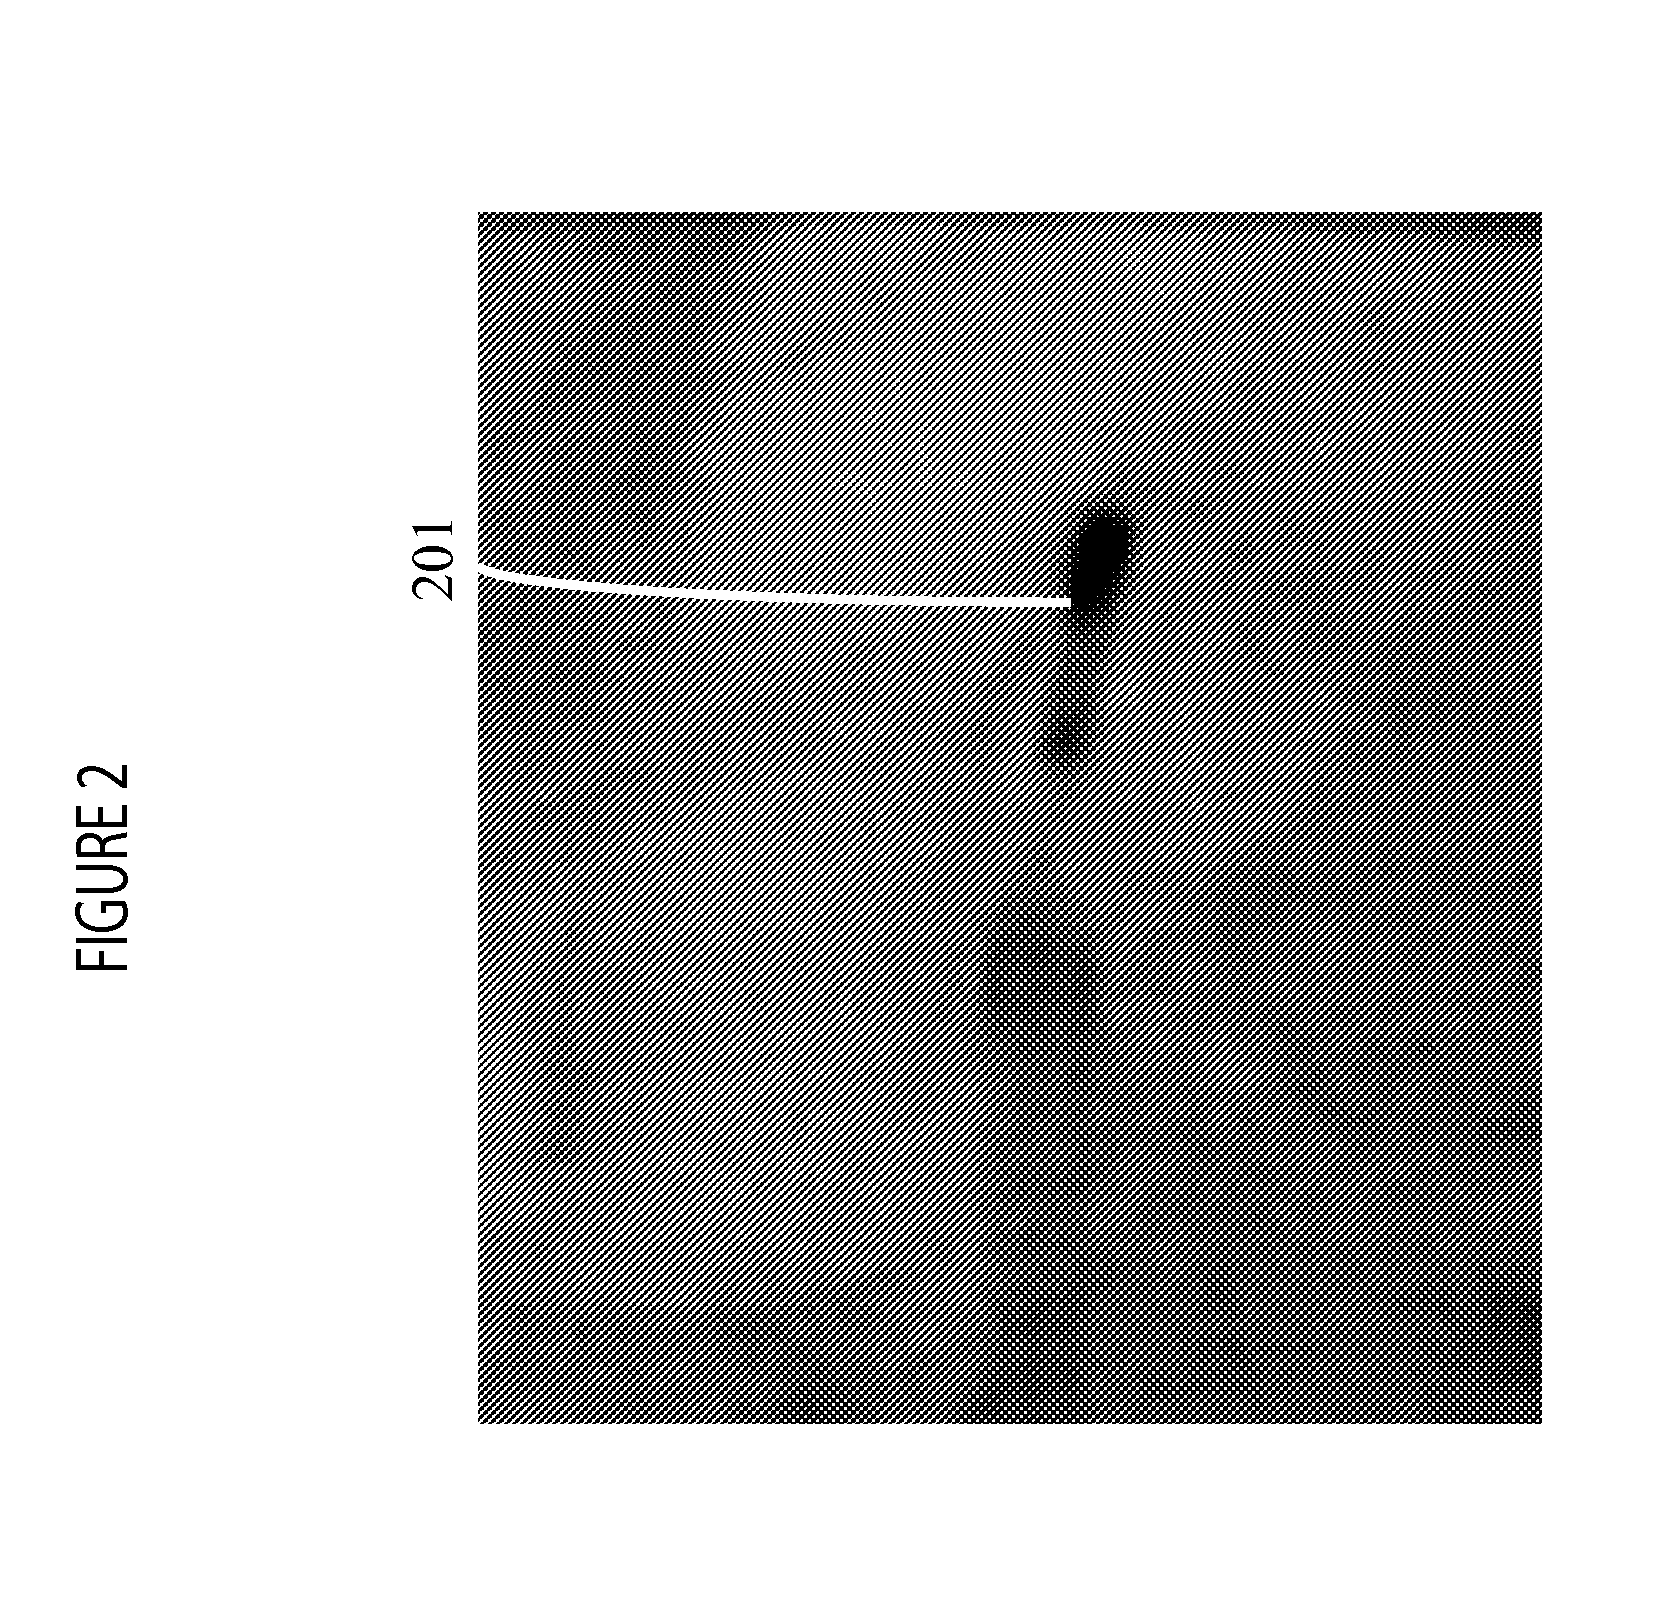 System for Detecting Rotation Angle of a Catheter in an X-ray Image